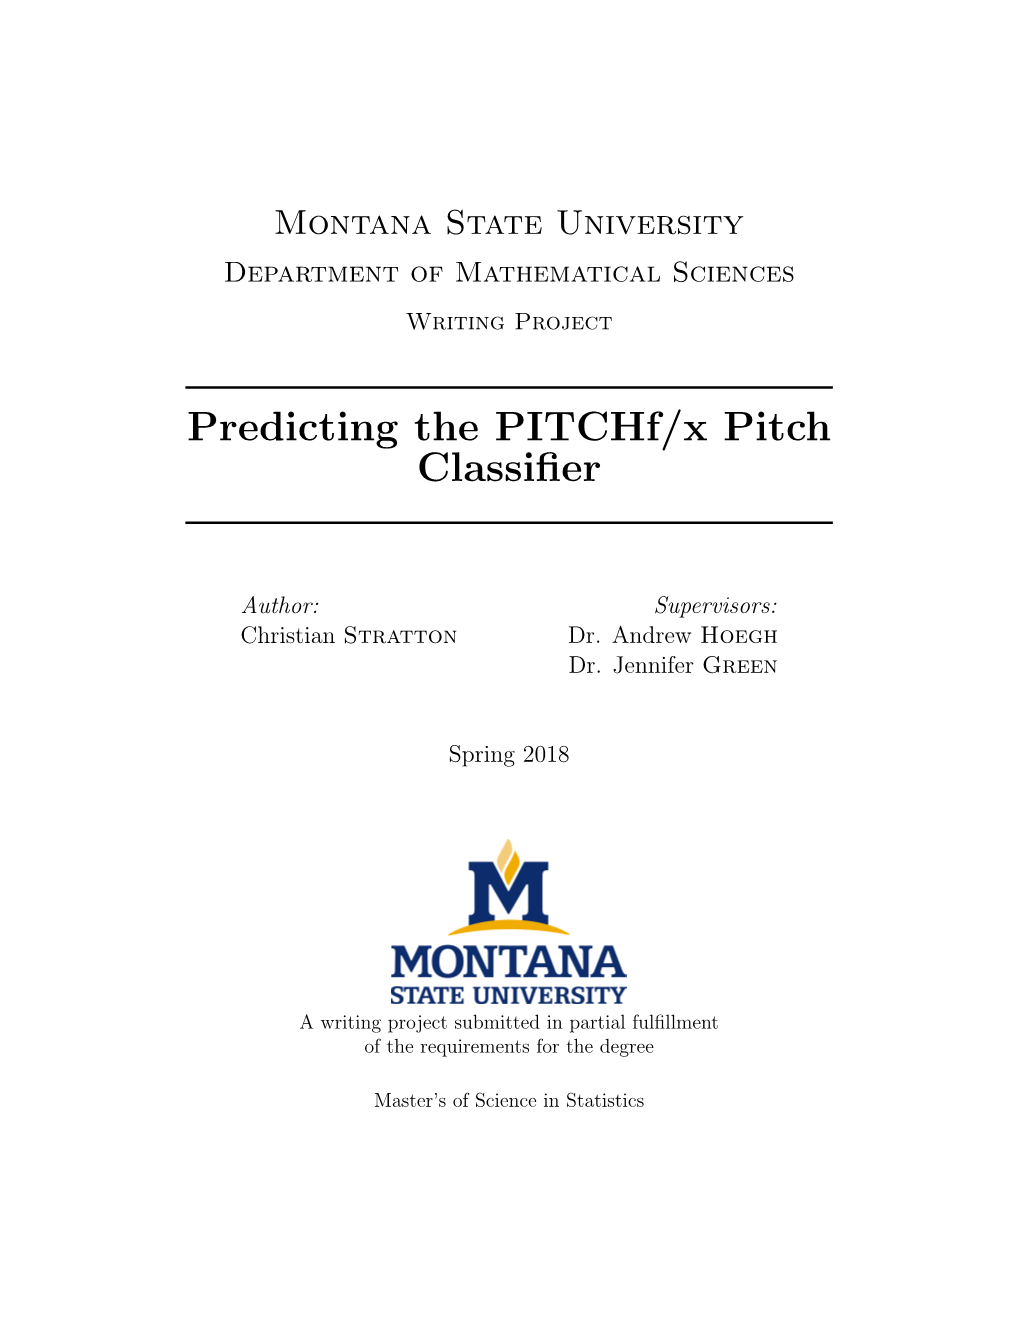 Predicting the Pitchf/X Pitch Classifier